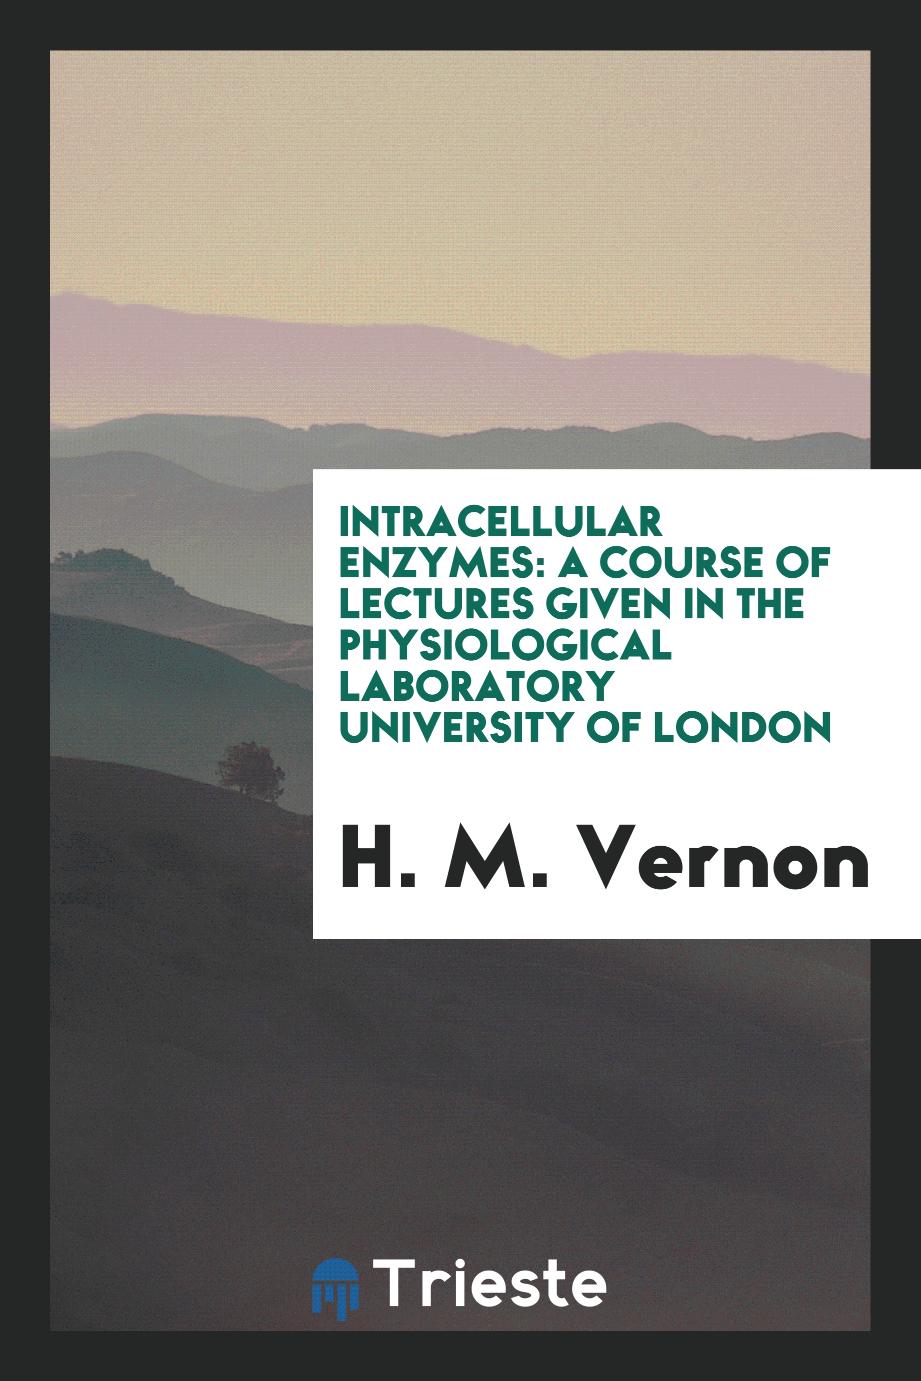 Intracellular Enzymes: A Course of Lectures Given in the Physiological Laboratory University of London